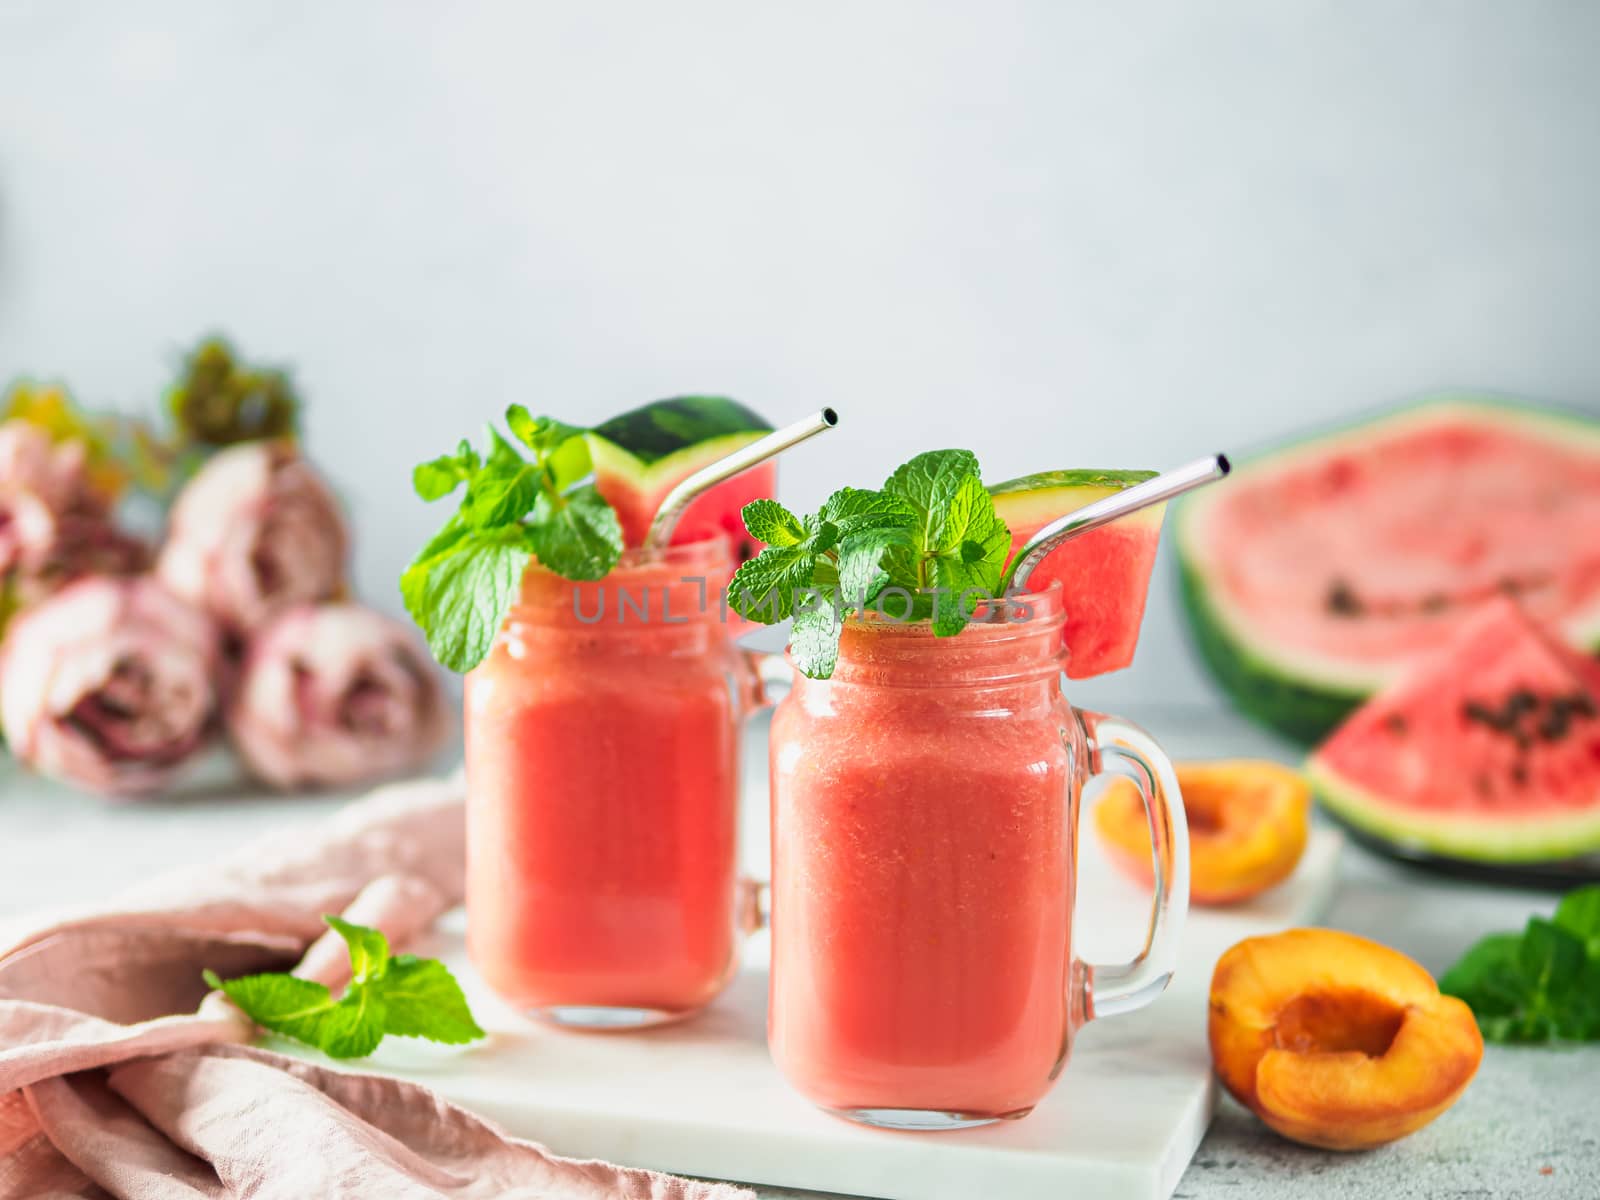 Watermelon and Peach Smoothies, copy space by fascinadora